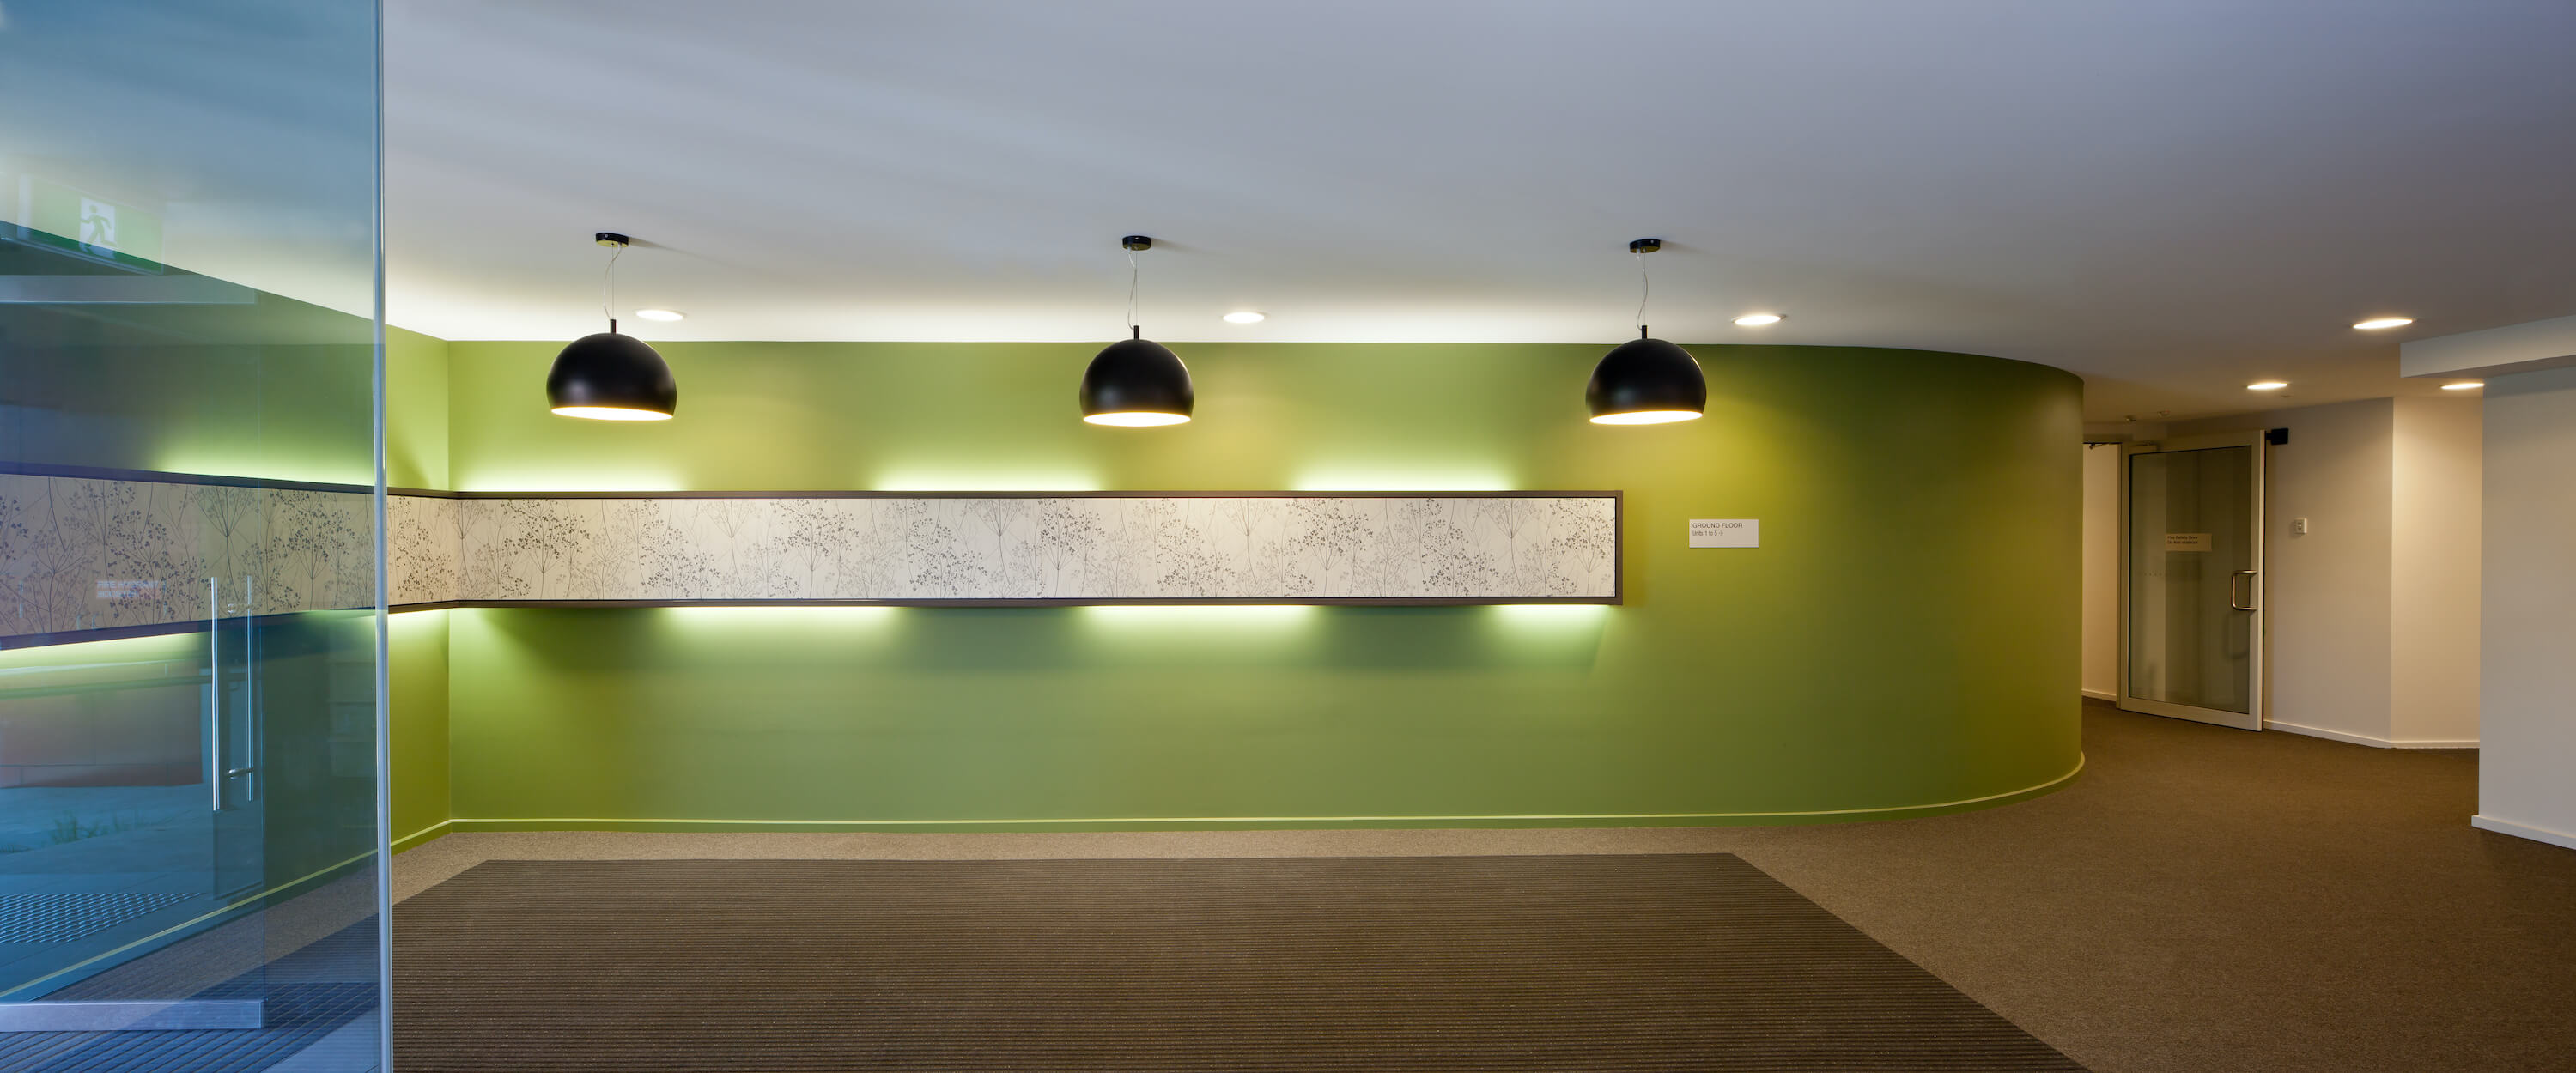 Curved green feature wall in building entry, black pendant lights